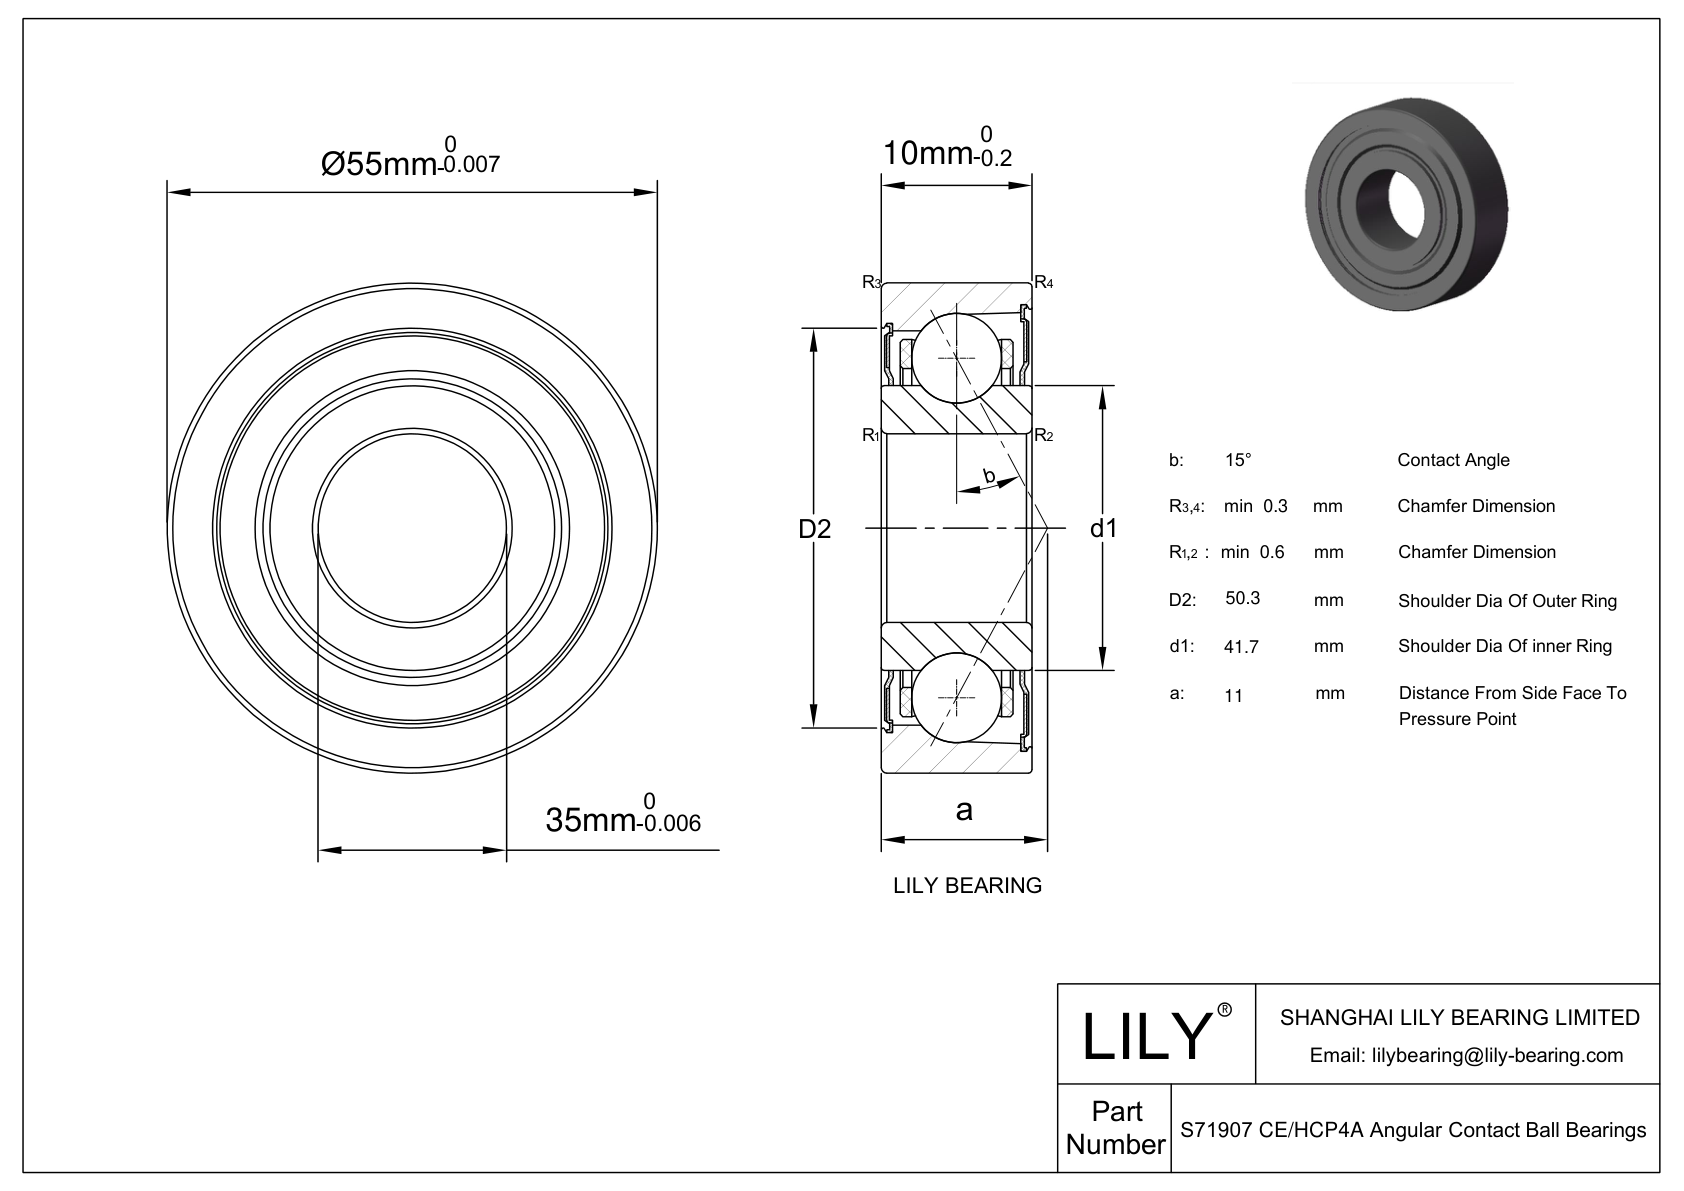 S71907 CE/HCP4A Super Precision Angular Contact Ball Bearings cad drawing